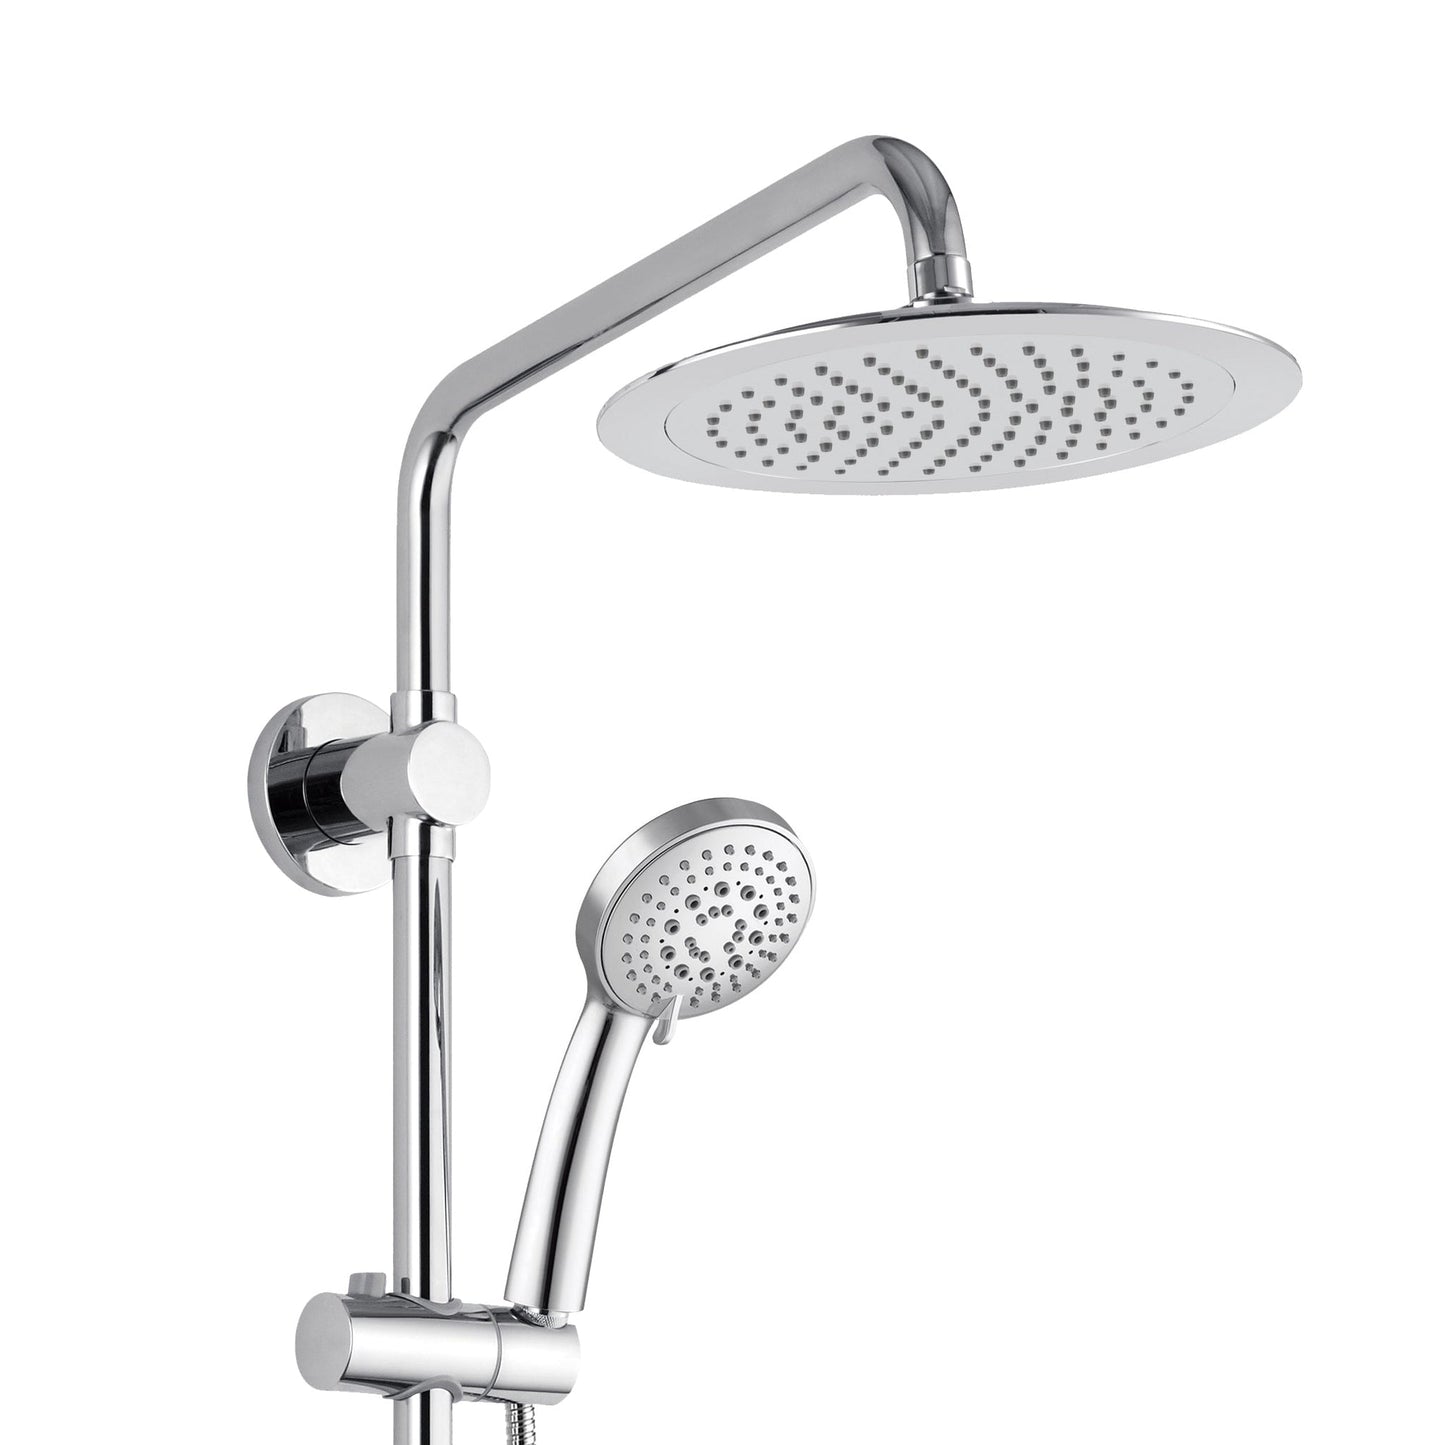 PULSE ShowerSpas SeaBreeze II 1.8 GPM Rain Shower System in Chrome Finish With 3-Function Hand Shower